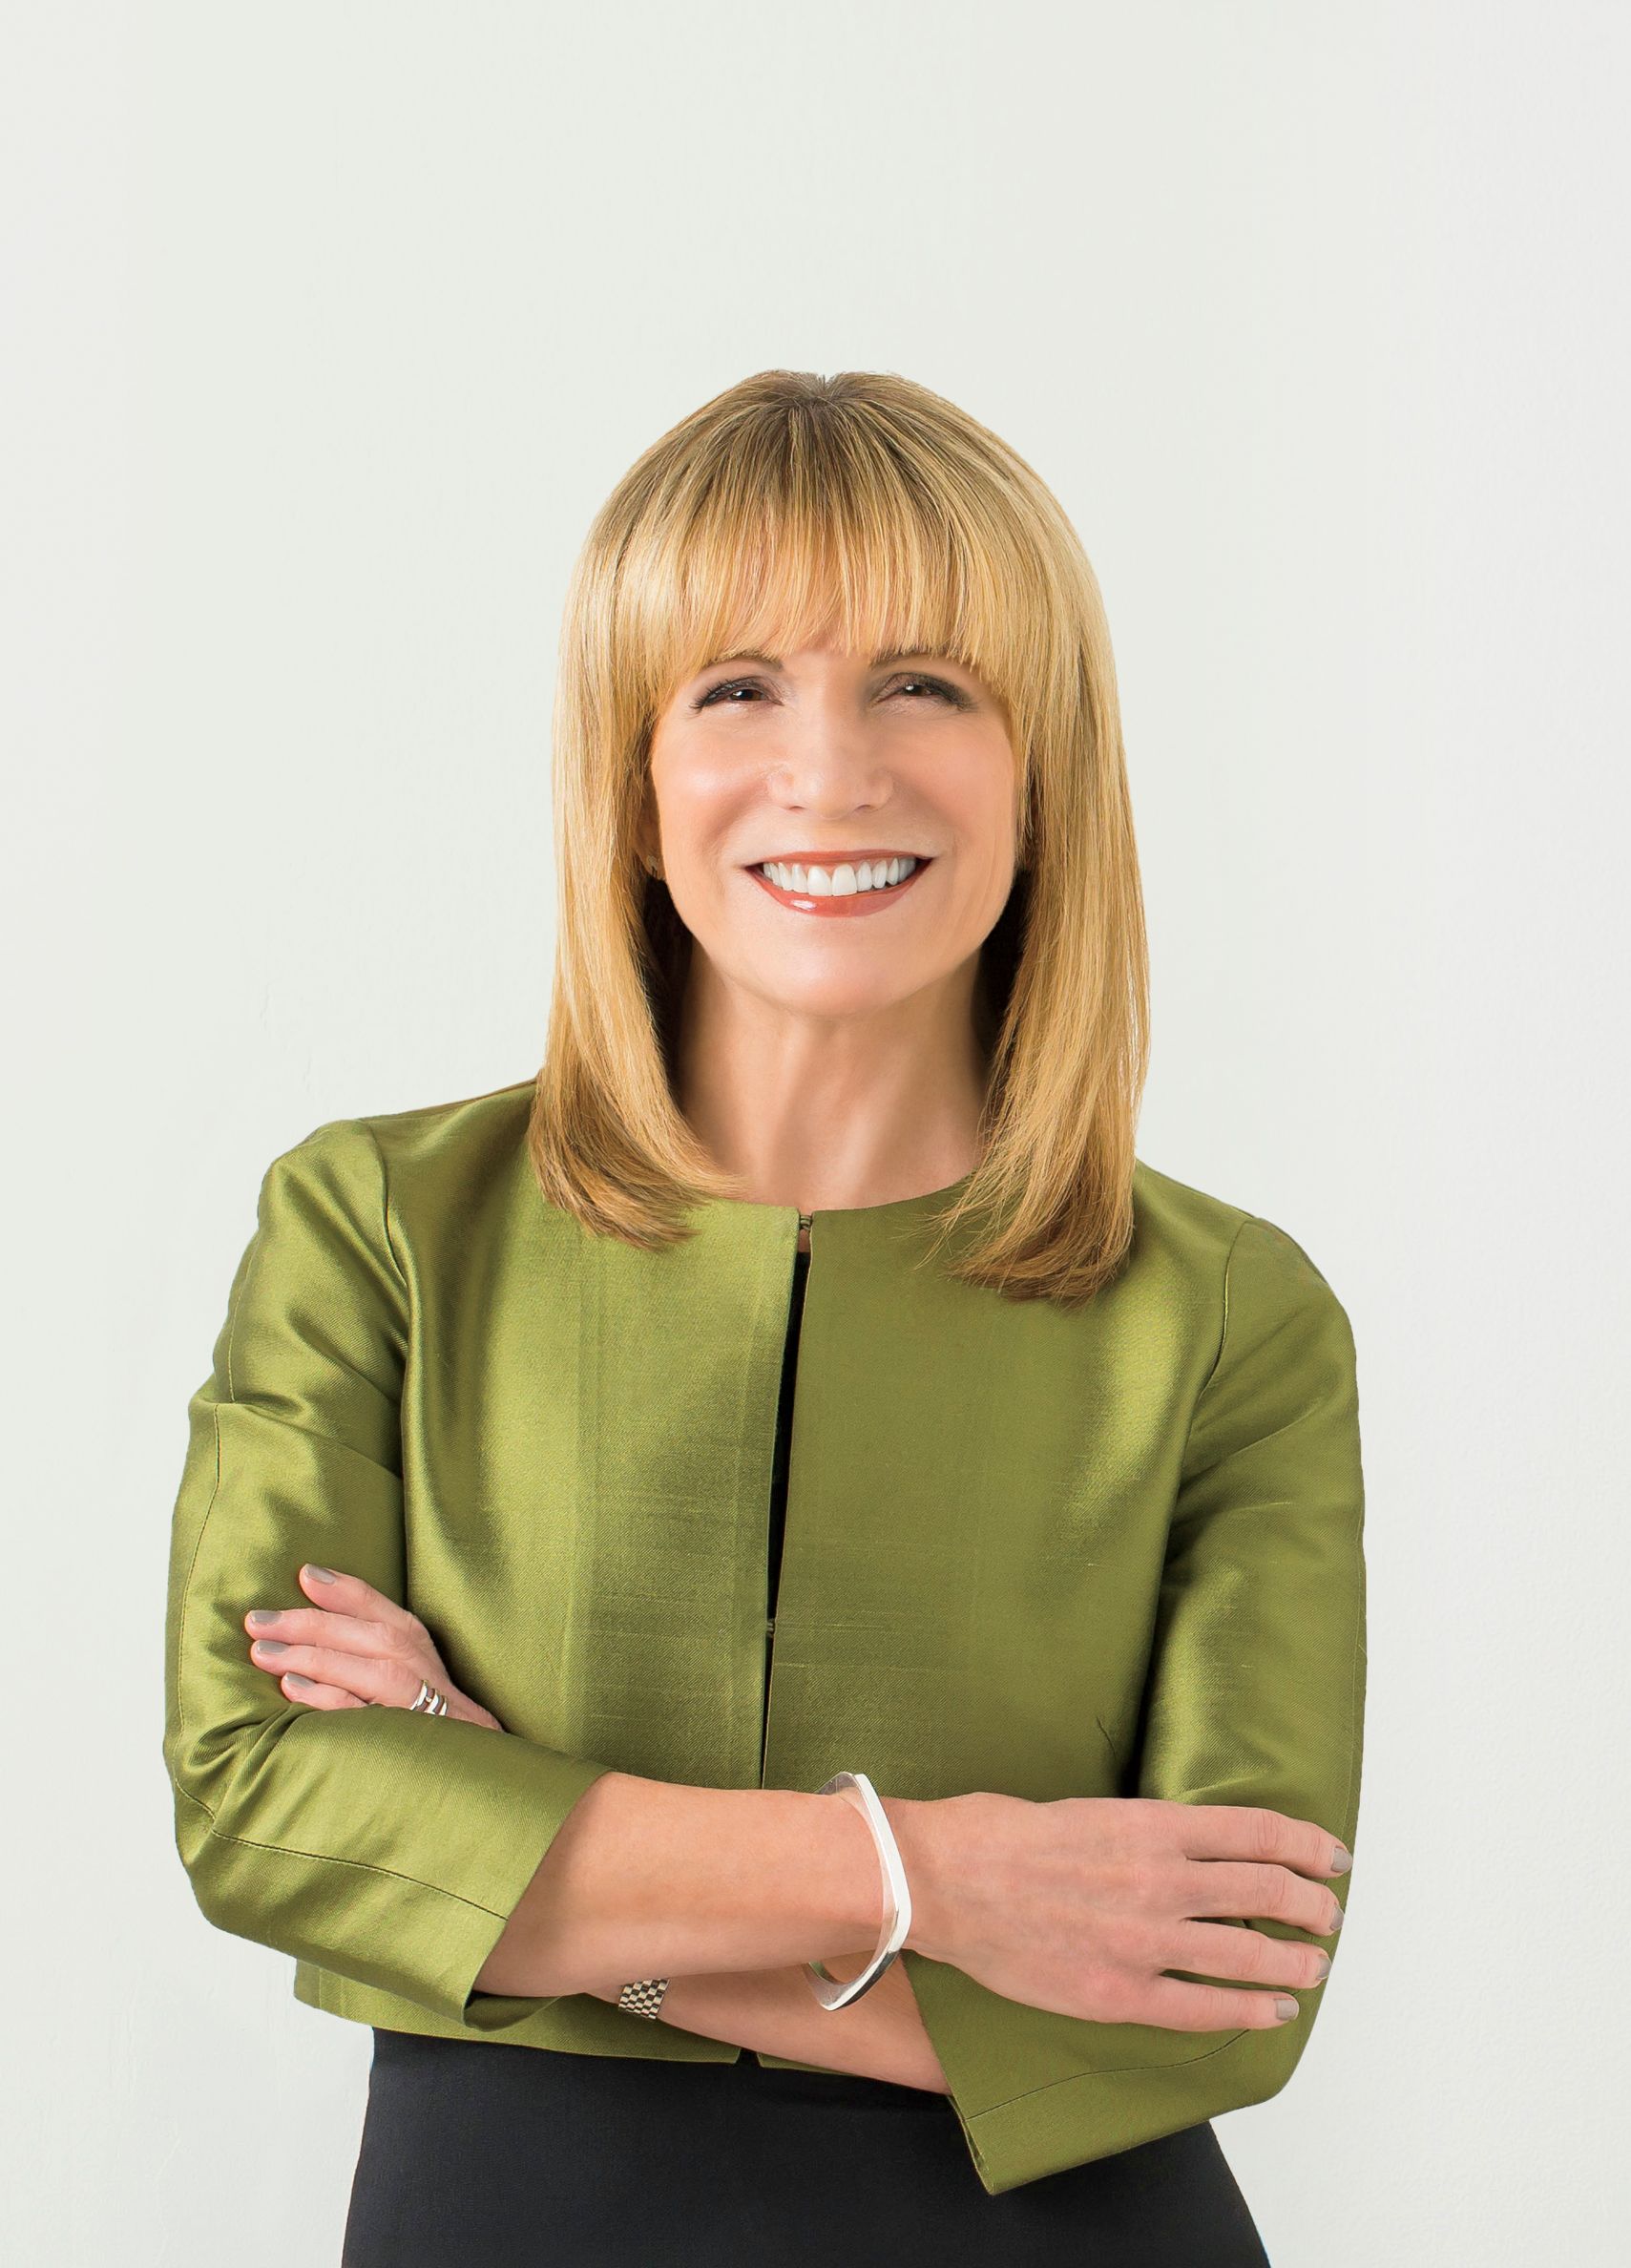 A white woman with shoulder-length blonde hair and straight-across bangs, wearing a chic olive green structured blazer, crosses her arms and smiles into the camera